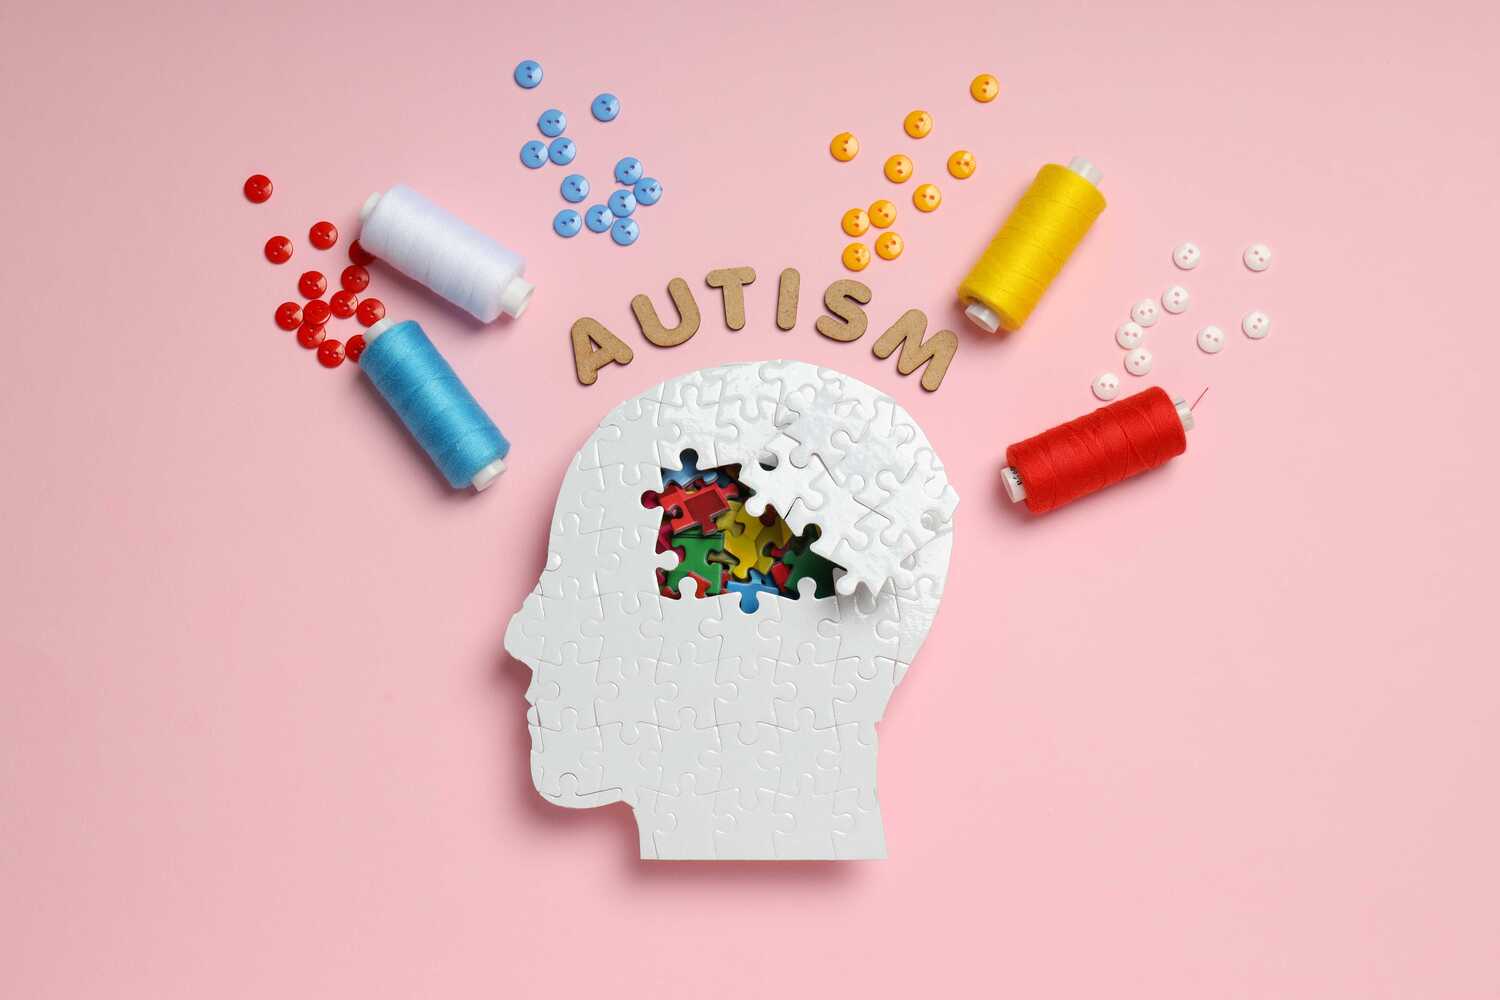 Risks and Side Effects of Using Marijuana to Treat Autism